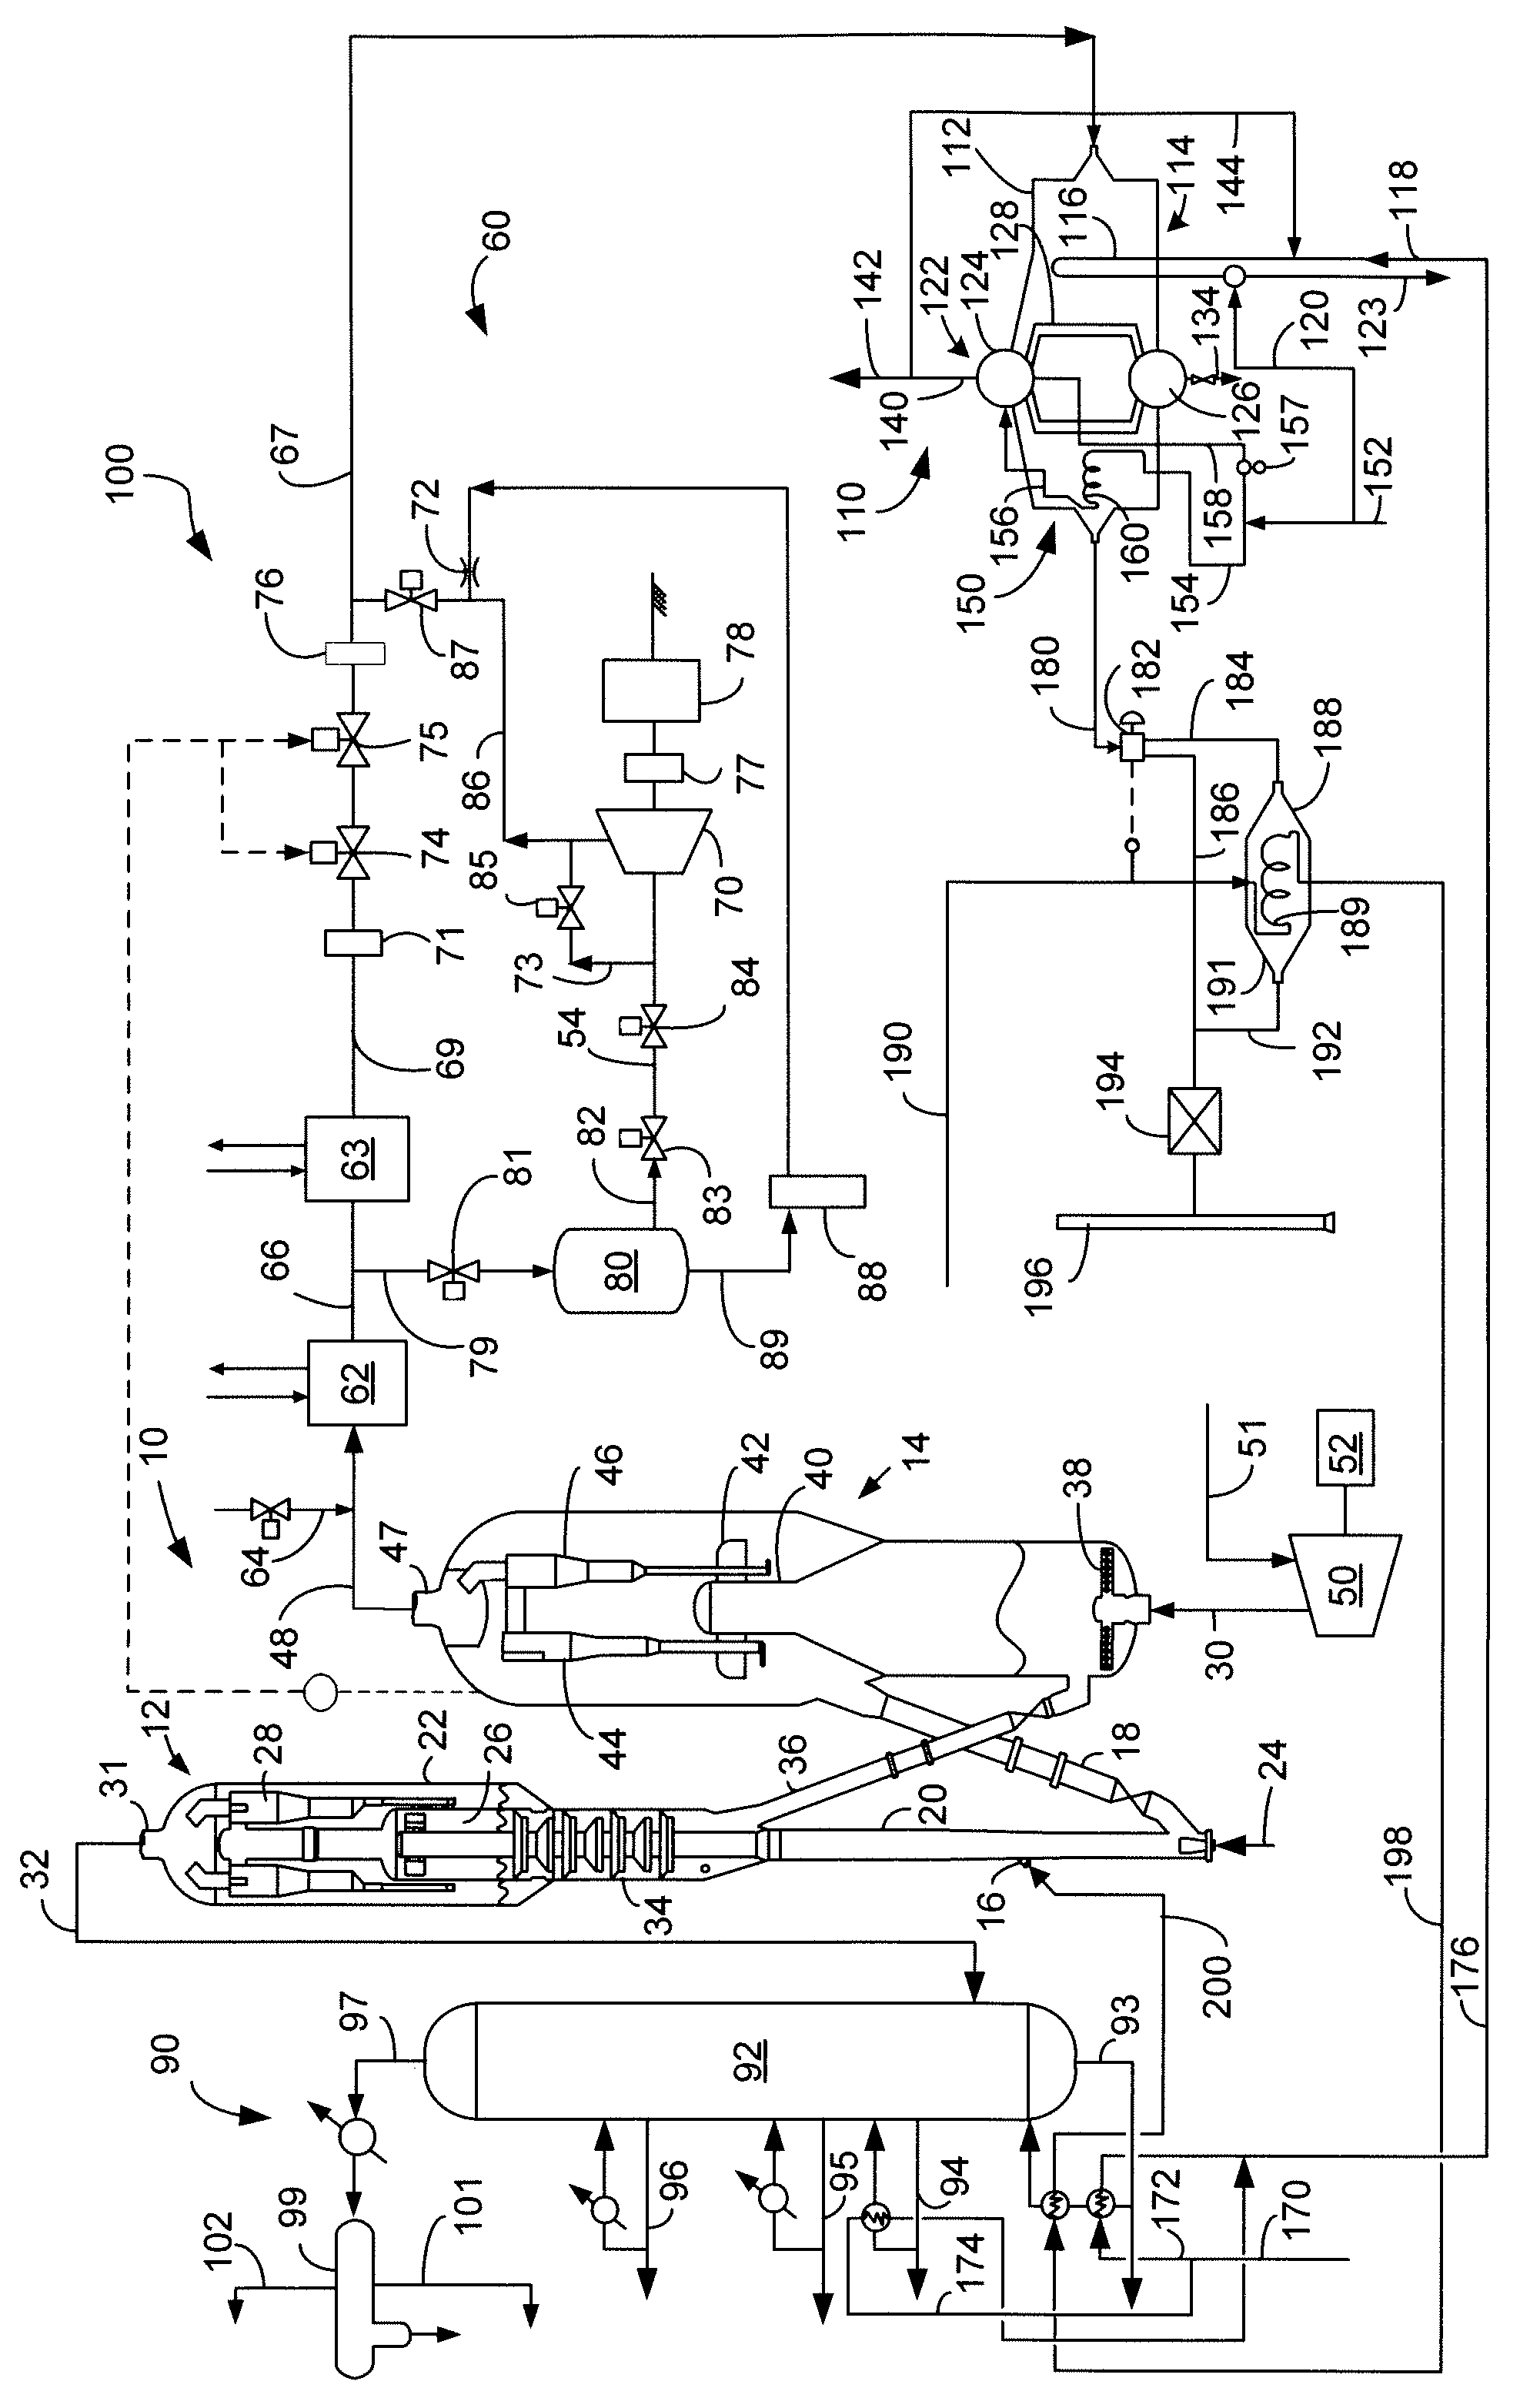 Apparatus for Feed Preheating with Flue Gas Cooler